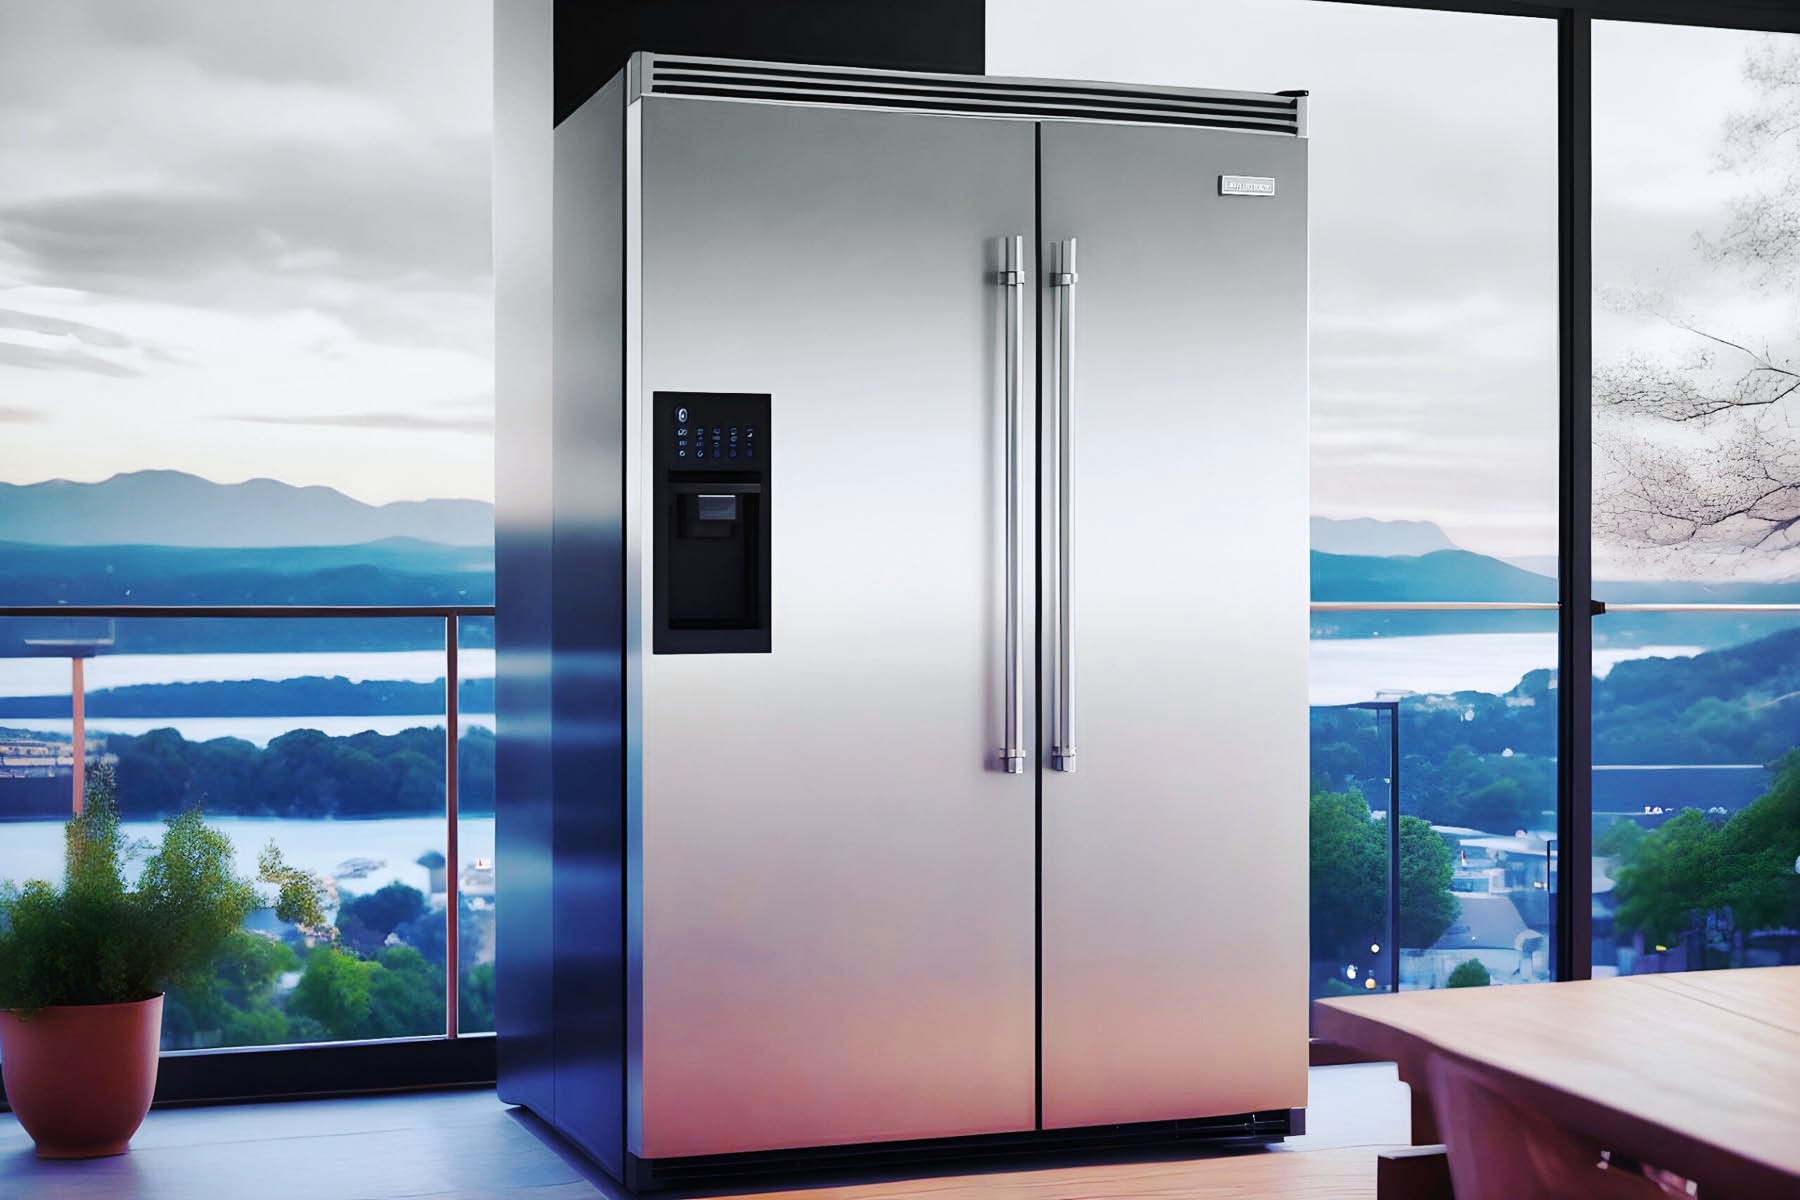 Georgetown TX's Sub-Zero refrigerator specialists for expert appliance repair